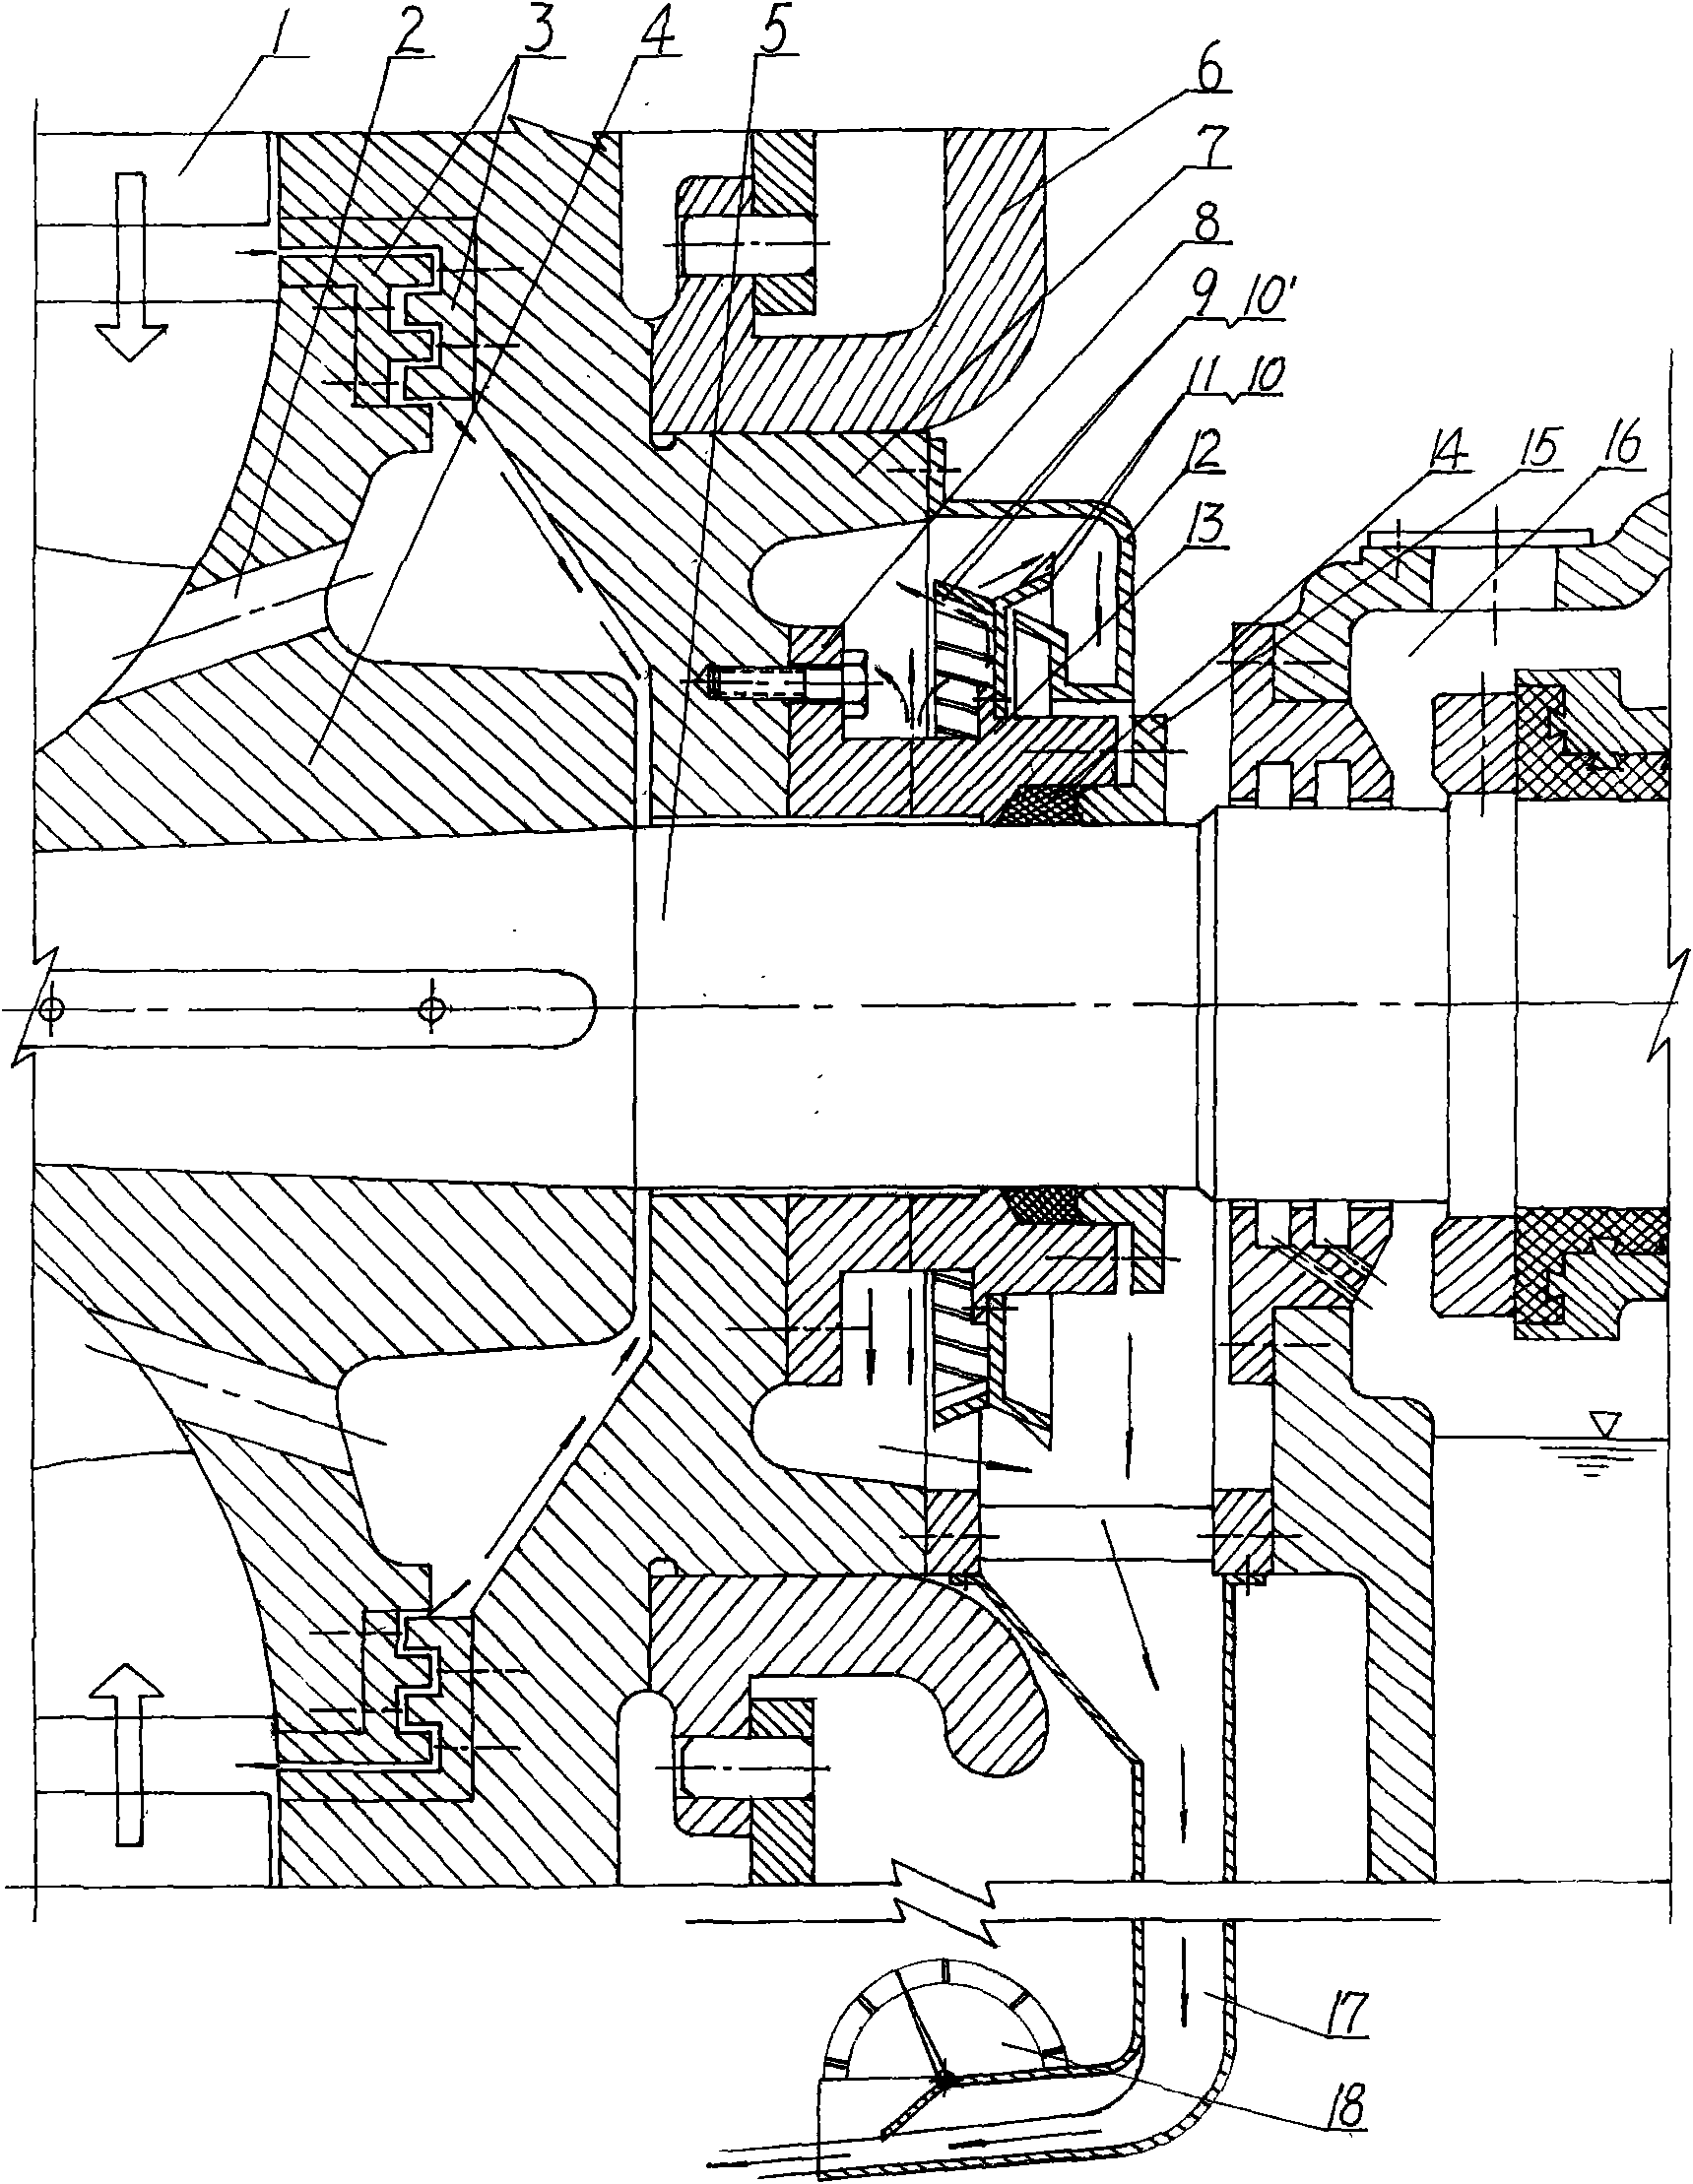 Adjustable gap seal and leakage treatment device